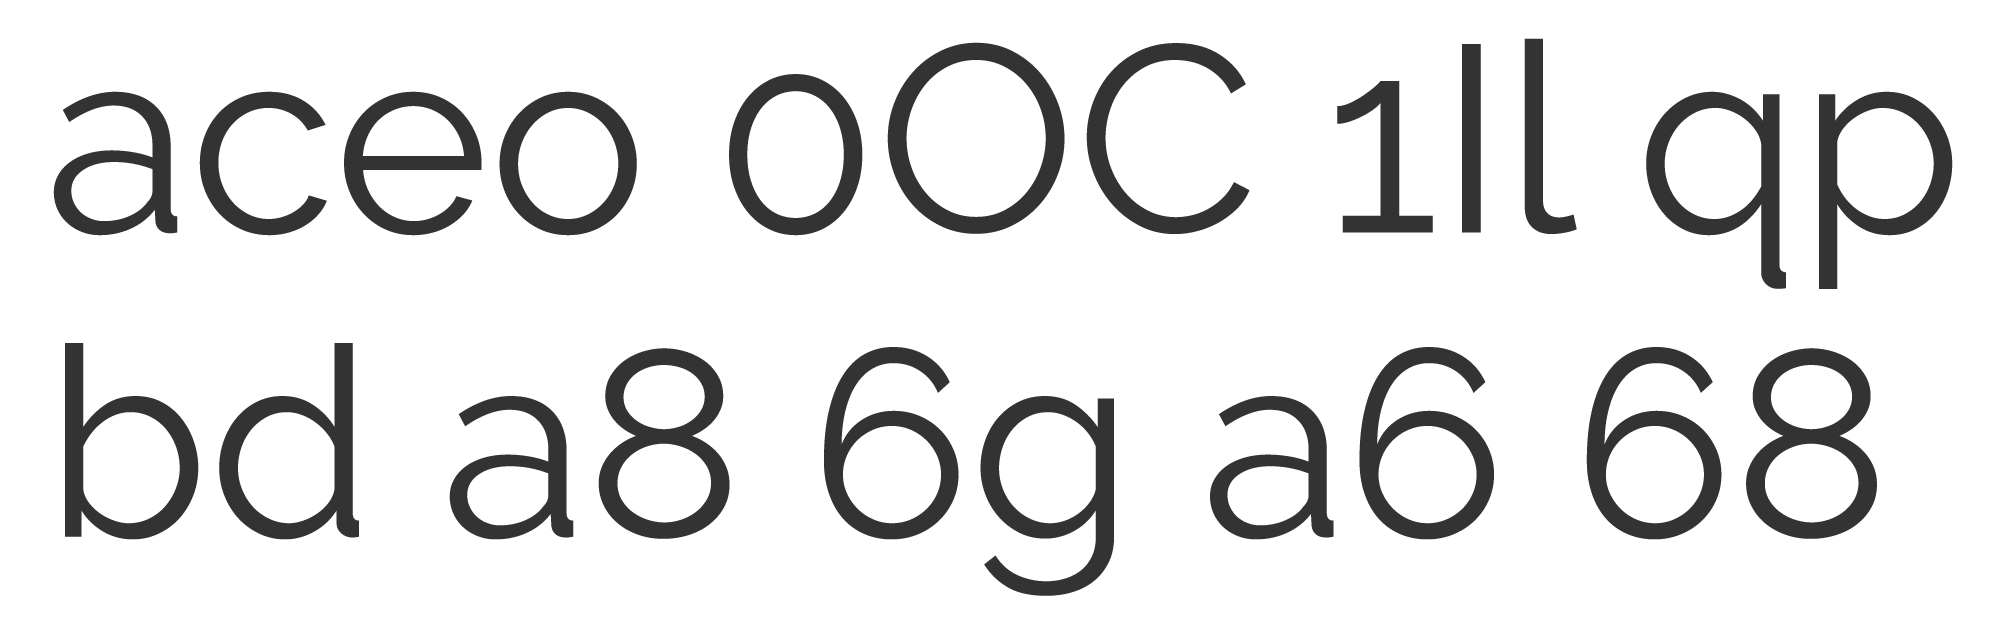 A series of similar characters from Raleway font.